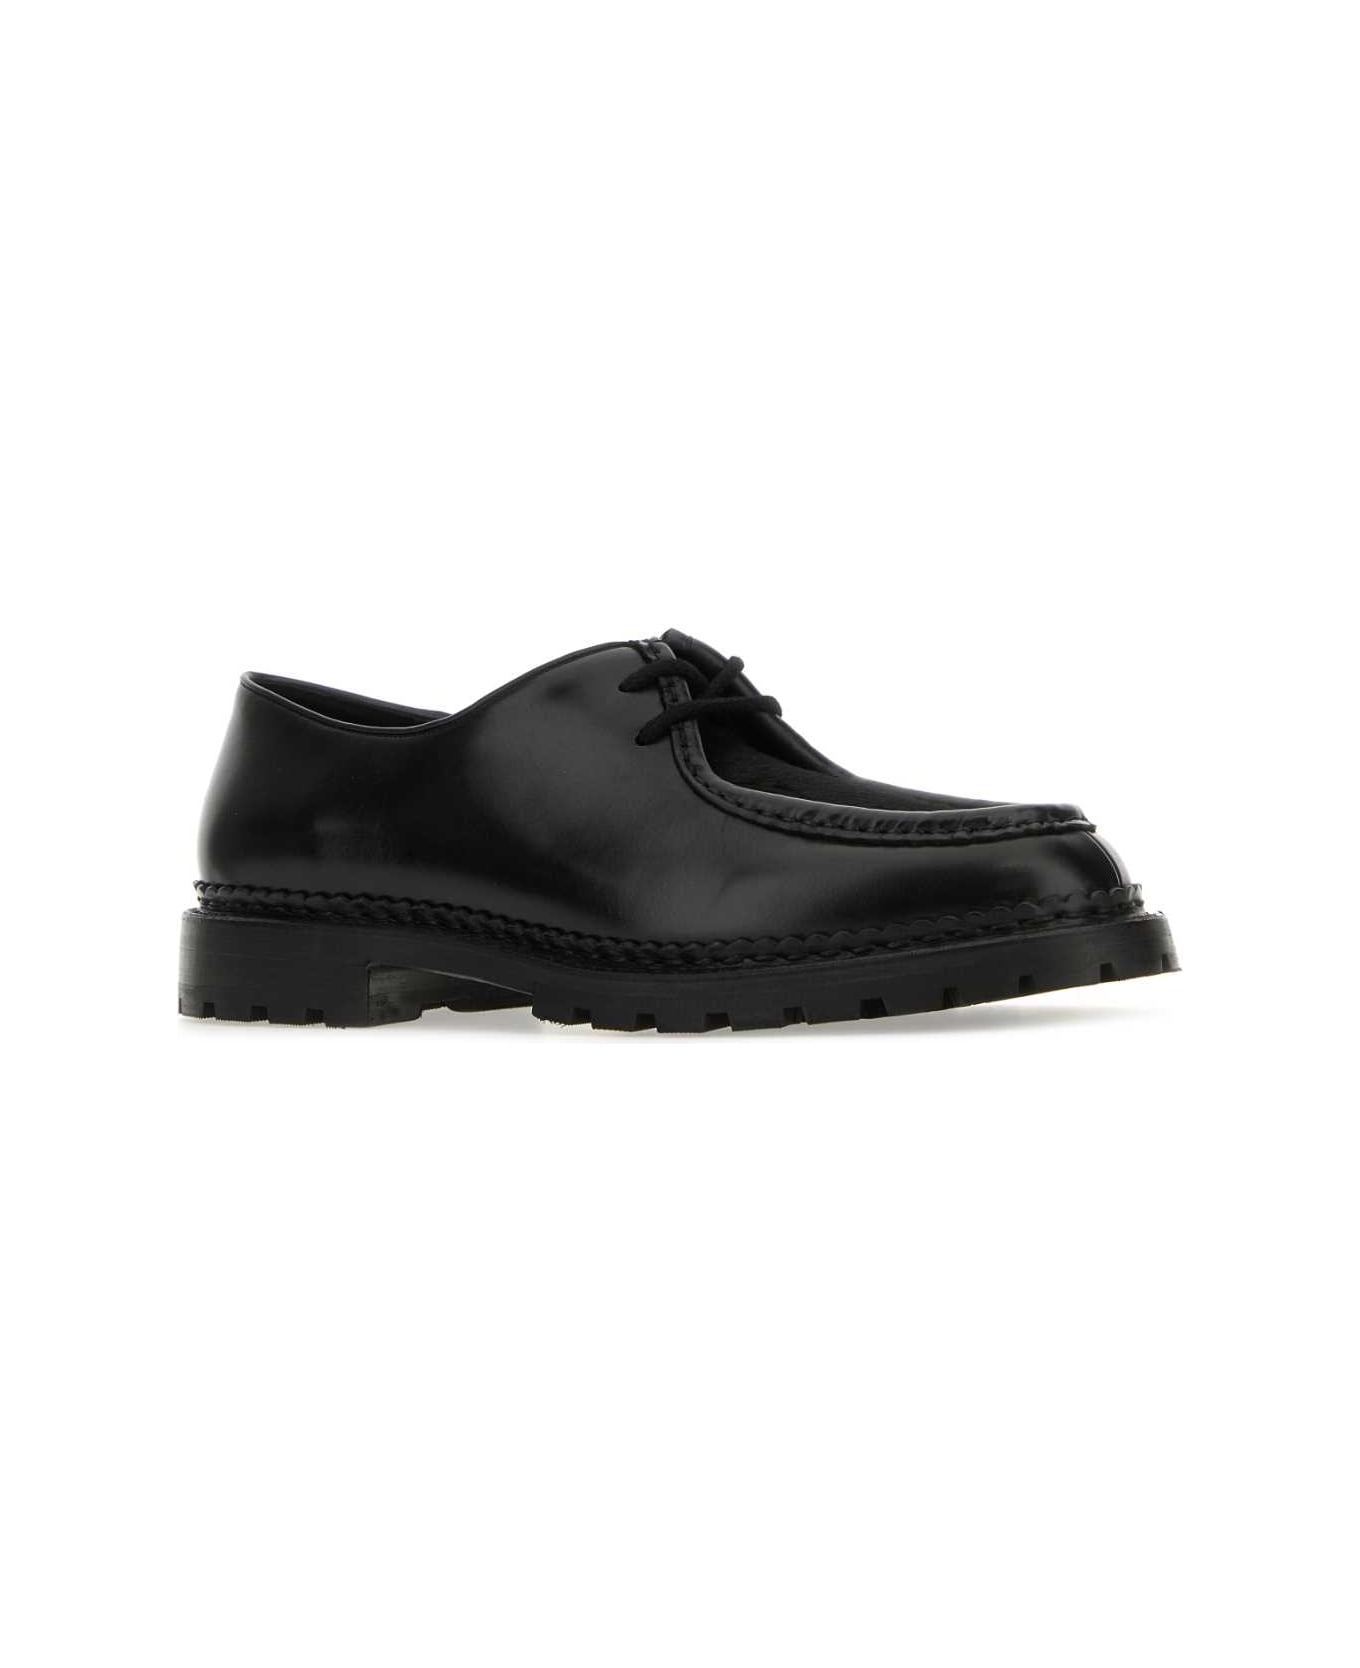 Saint Laurent Leather And Calf Hair Lace-up Shoes - NERONERONERO ローファー＆デッキシューズ